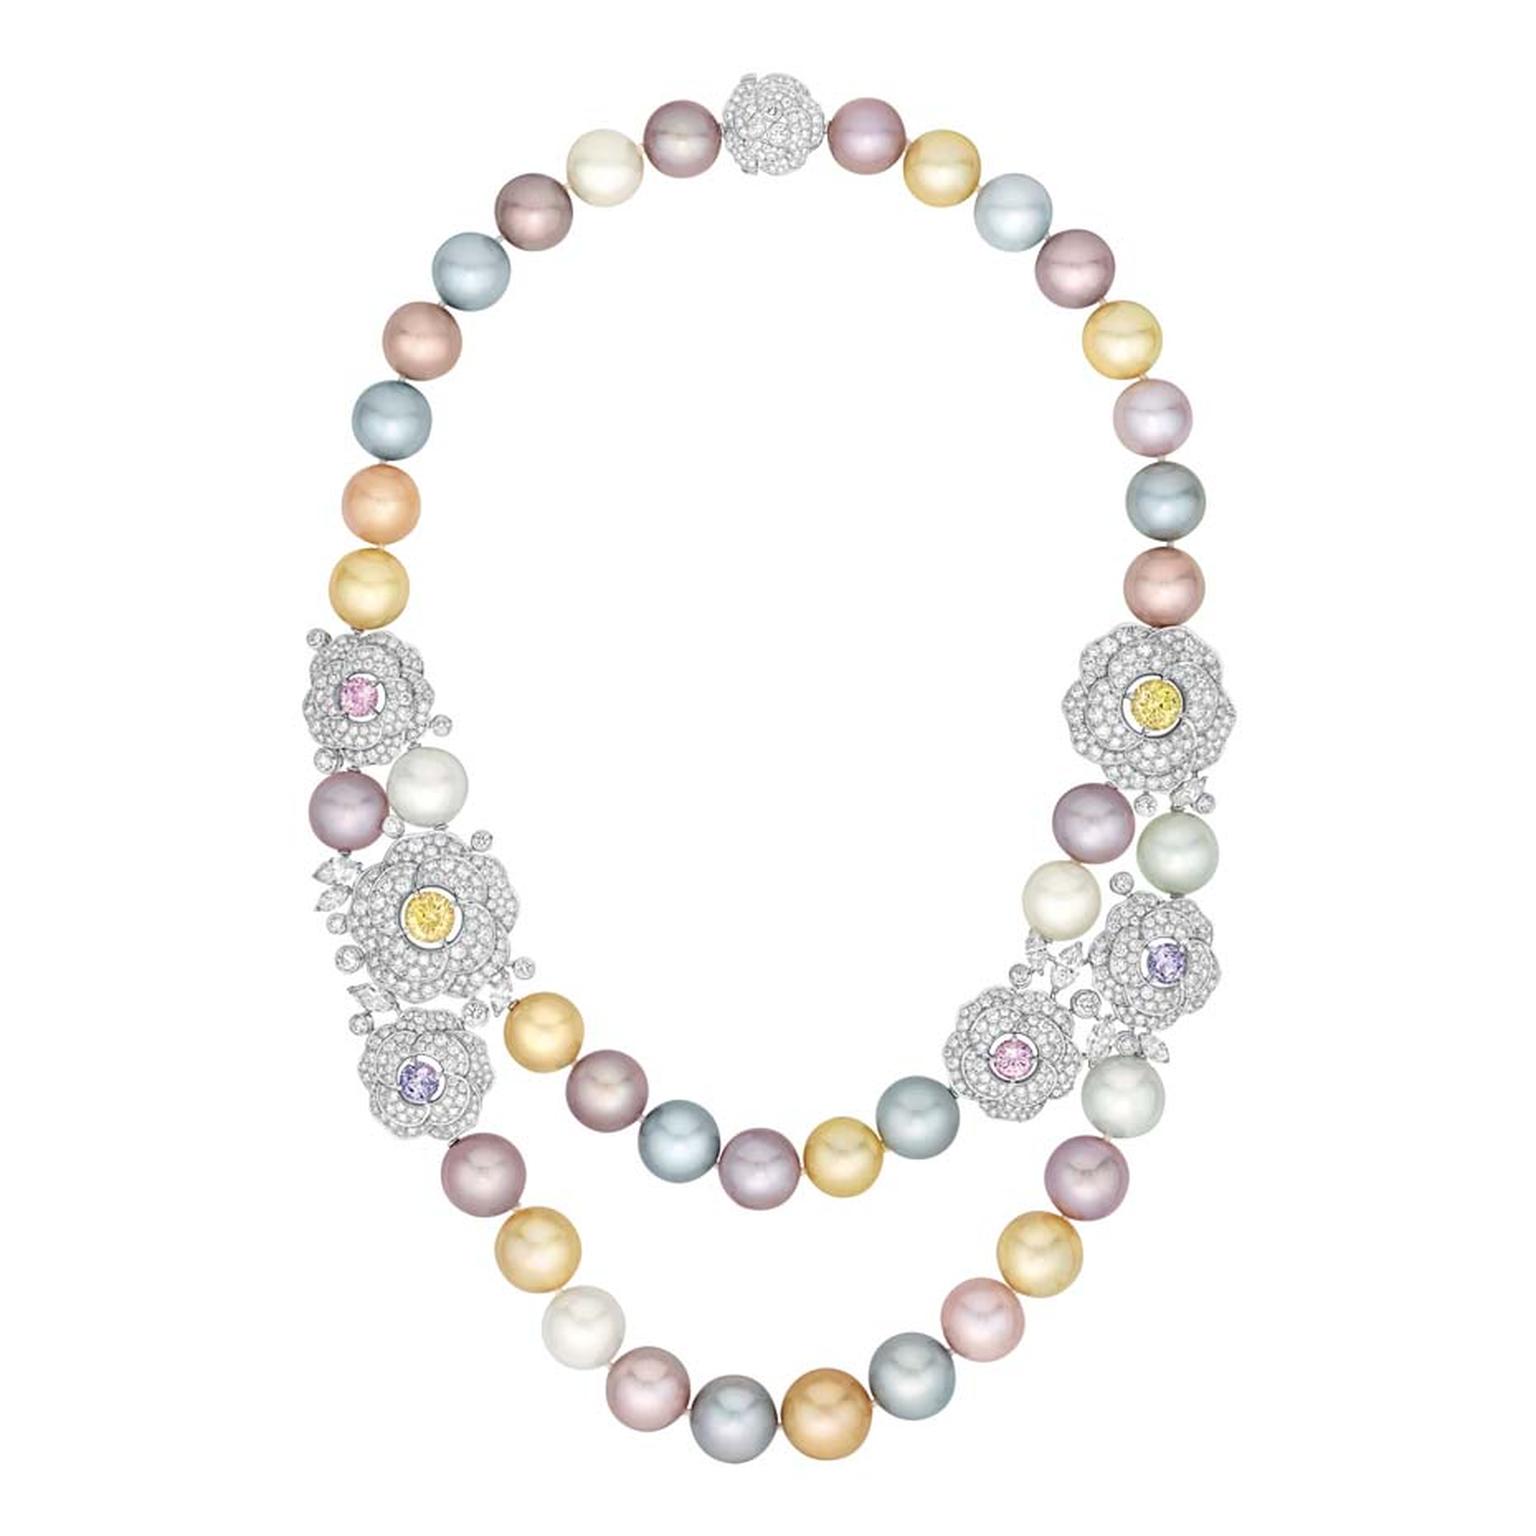 Les Perles de Chanel: Coco Chanel inspires a new high jewellery collection  devoted entirely to pearls